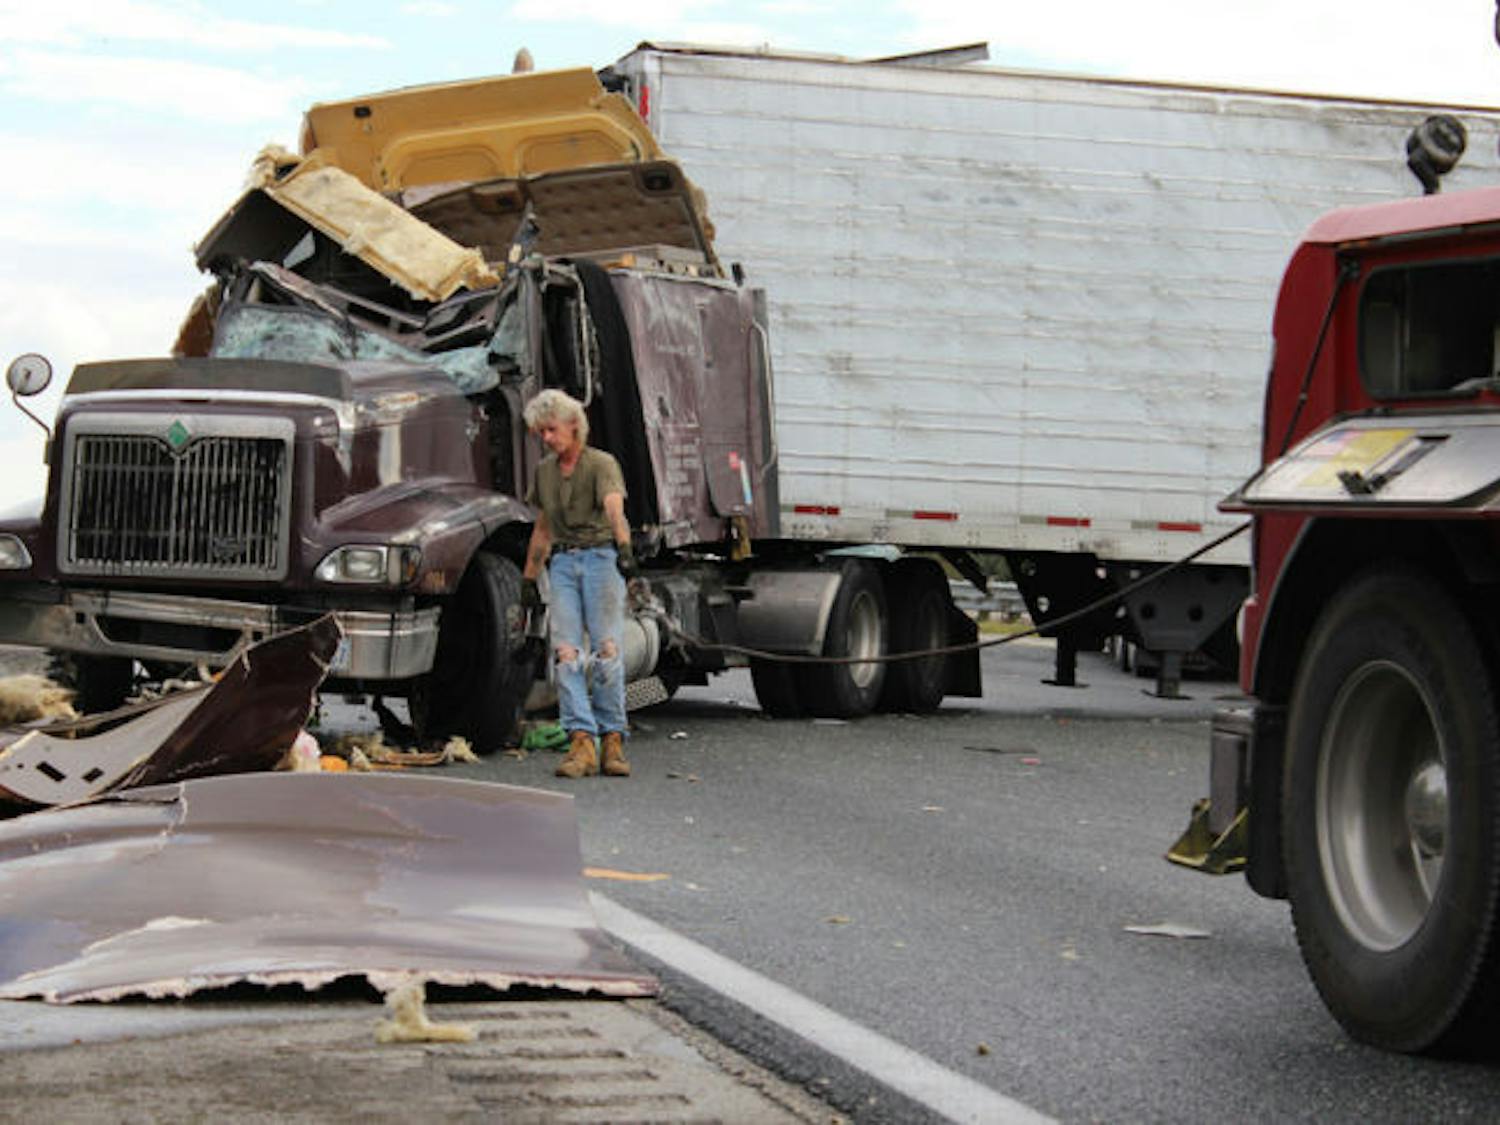 University Towing &amp; Transport Inc. worker Jerry Bailey prepares to tow a semitruck after an accident that left the truck overturned, blocking all three northbound lanes on Interstate 75 near the Micanopy exit on Saturday afternoon.